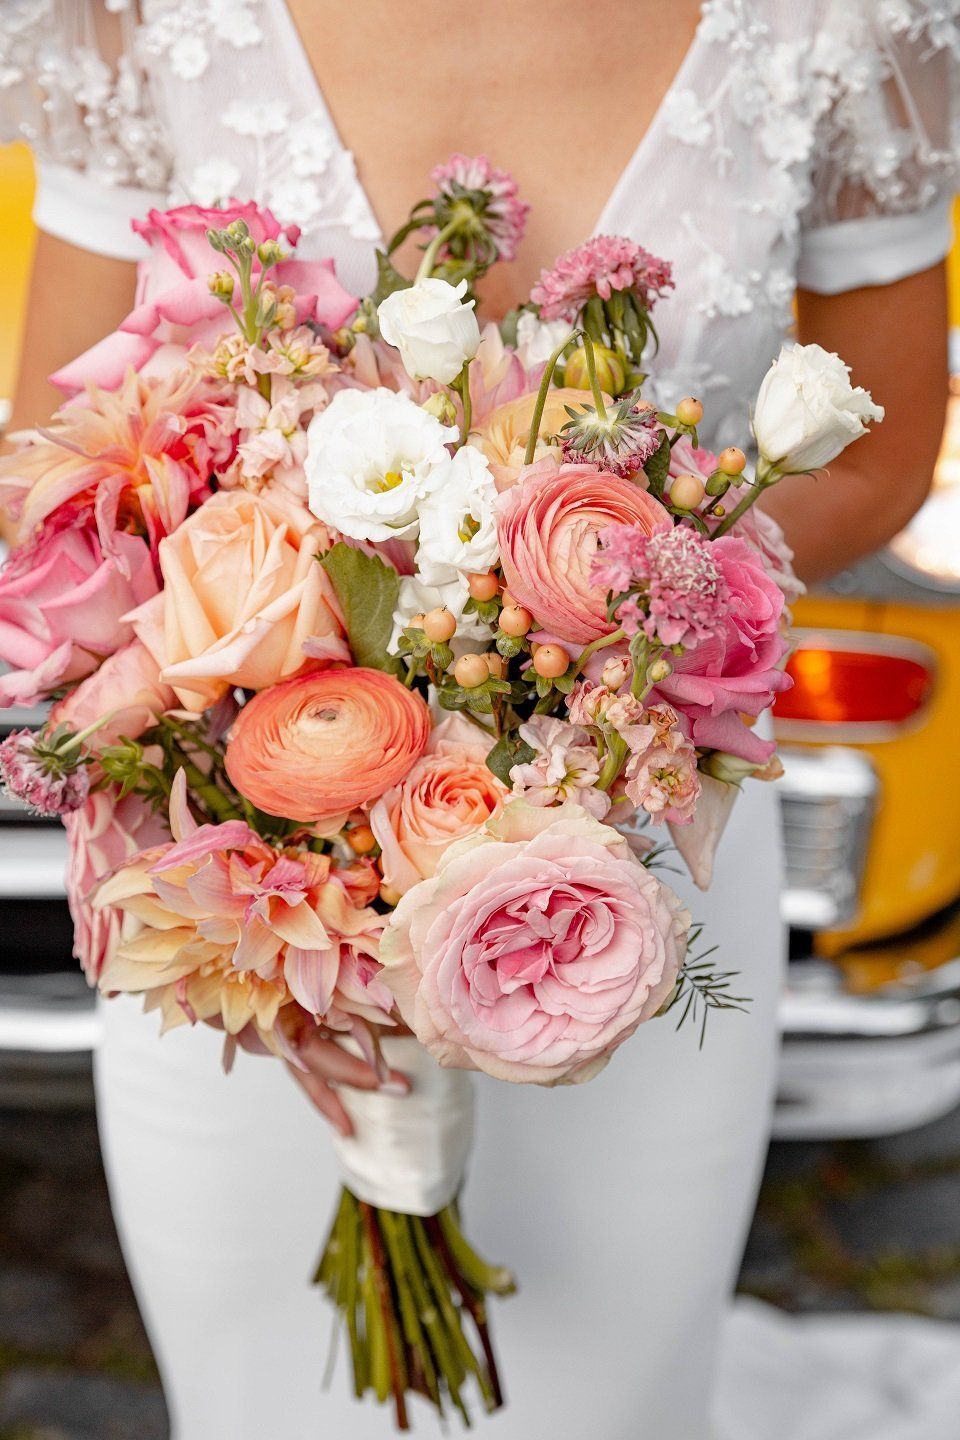 Southern wedding ideas and inspiration